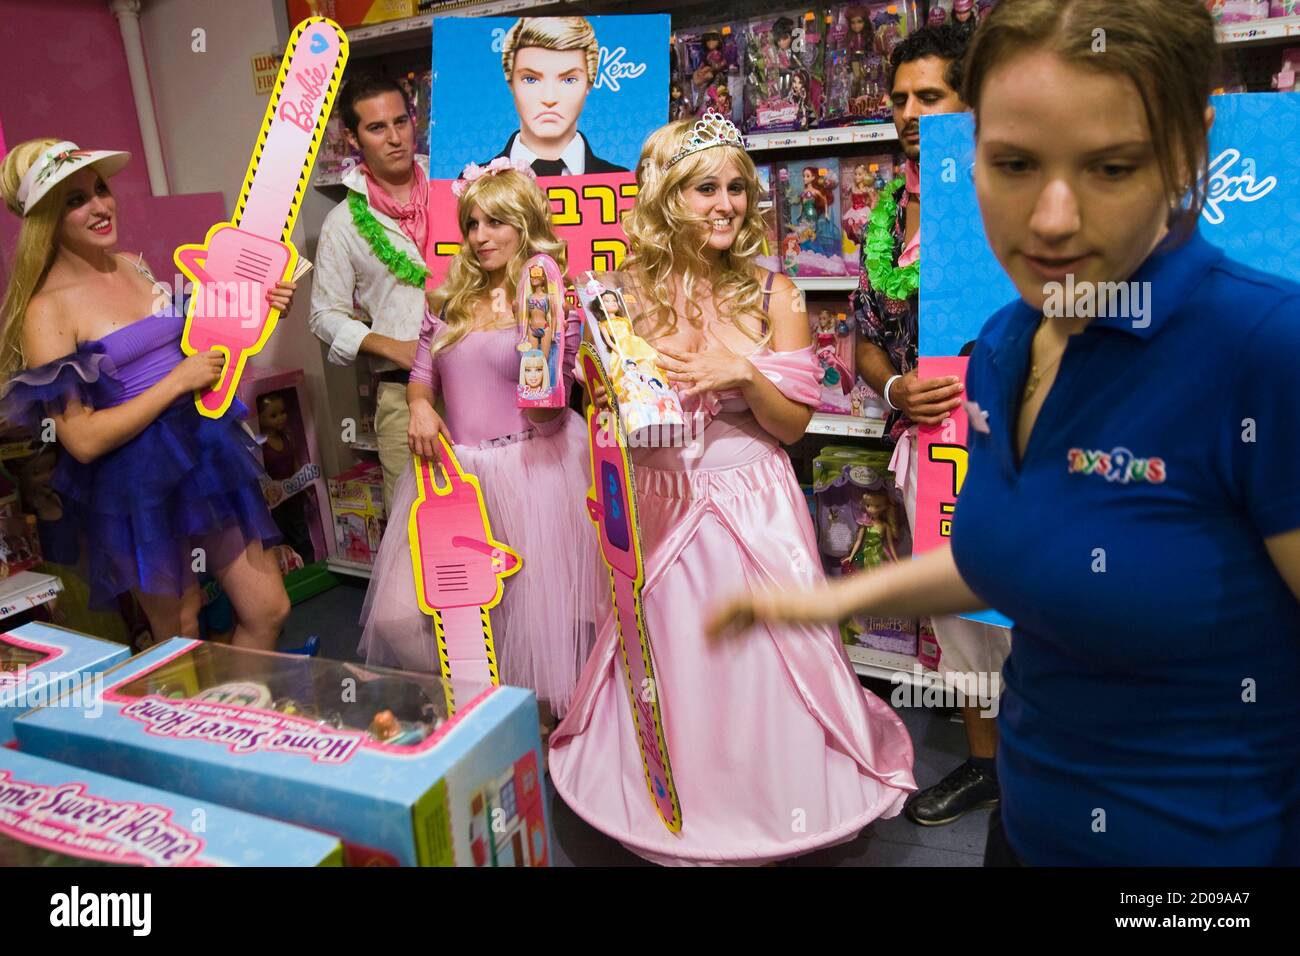 worker (R) stands next Greenpeace activists dressed as and Ken dolls as they pose inside Toys "R" Us store in Tel Aviv June 12, 2011. Greenpeace said last